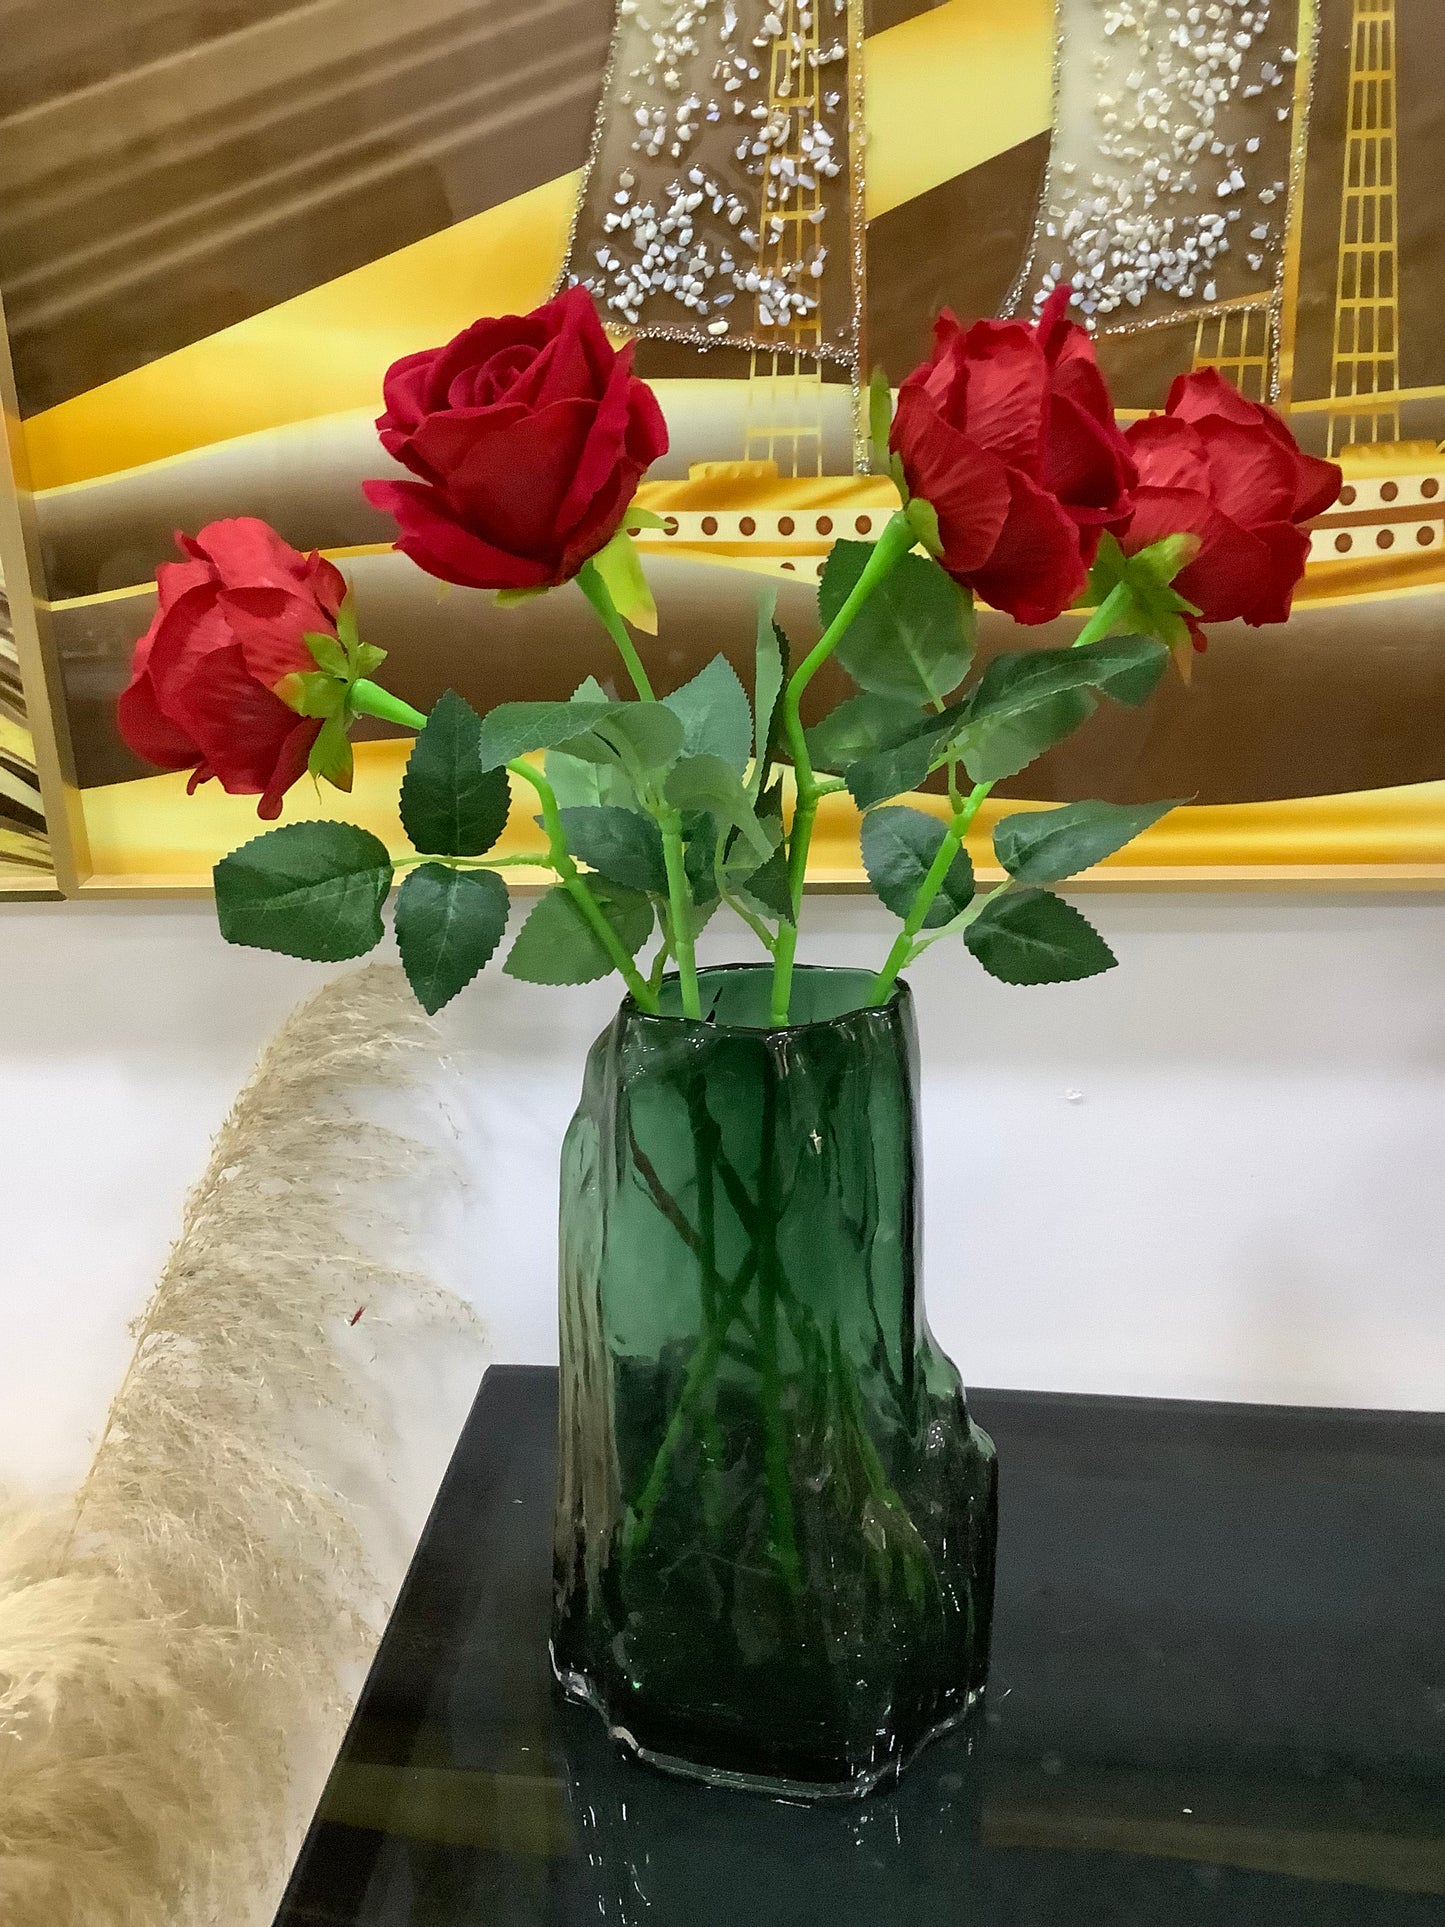 Rocky Vase and Roses